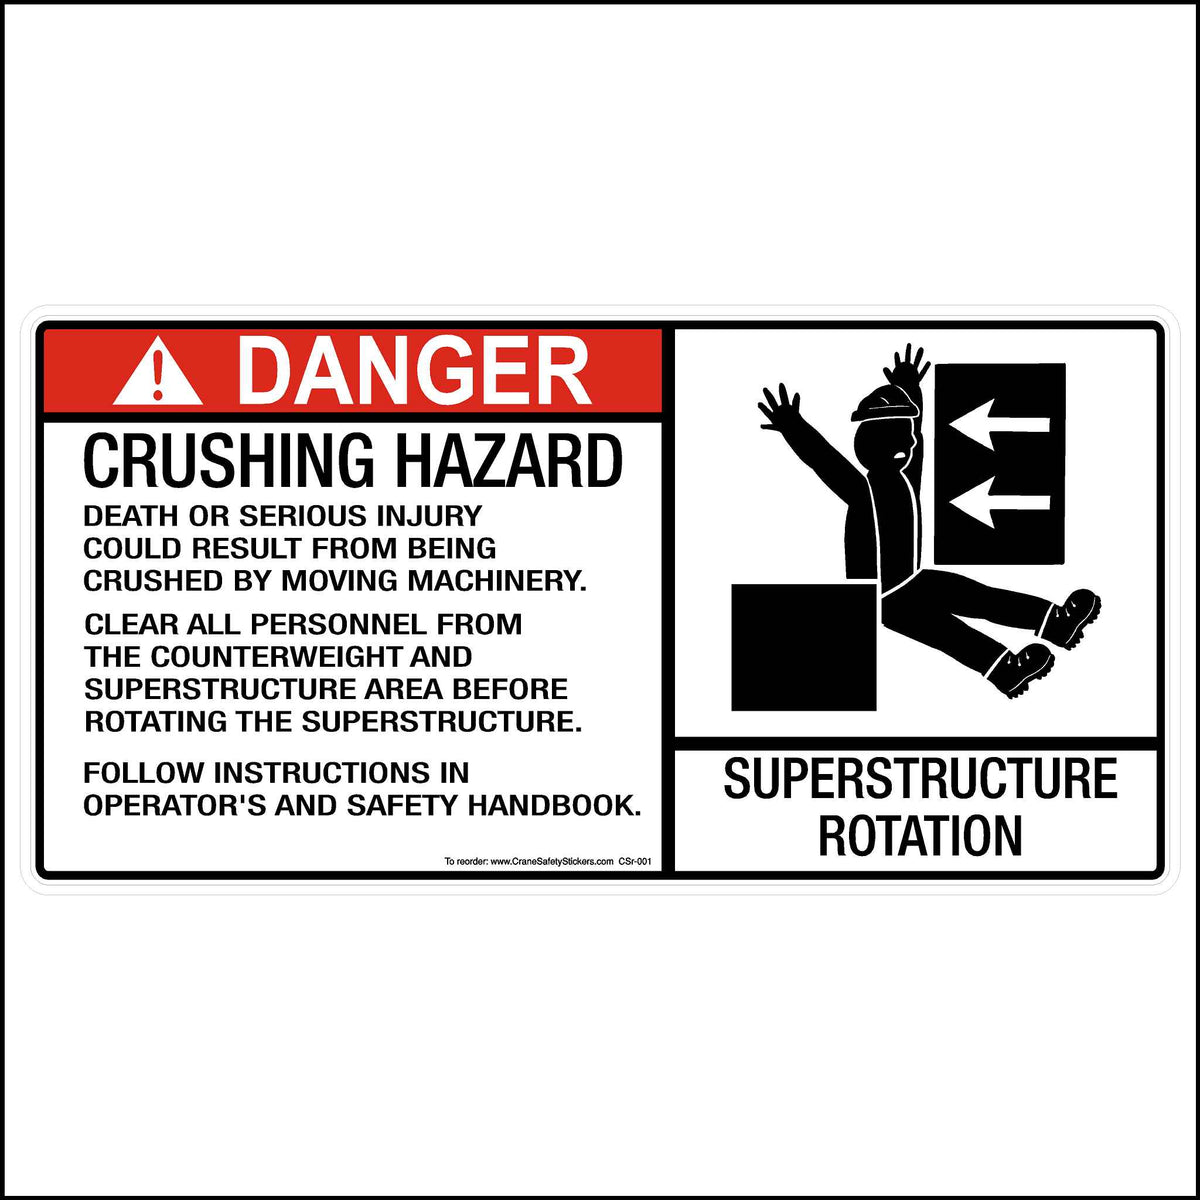 Crane Superstructure Rotation Hazard Sticker Printed With, DANGER Crushing Hazard. Death Or Serious Injury Could Result From Being Crushed By Moving Machinery. Clear All Personnel From The Counterweight And Superstructure Area Before Rotating The Superstructure. Follow Instructions In Operator&#39;s And Safety Handbook.